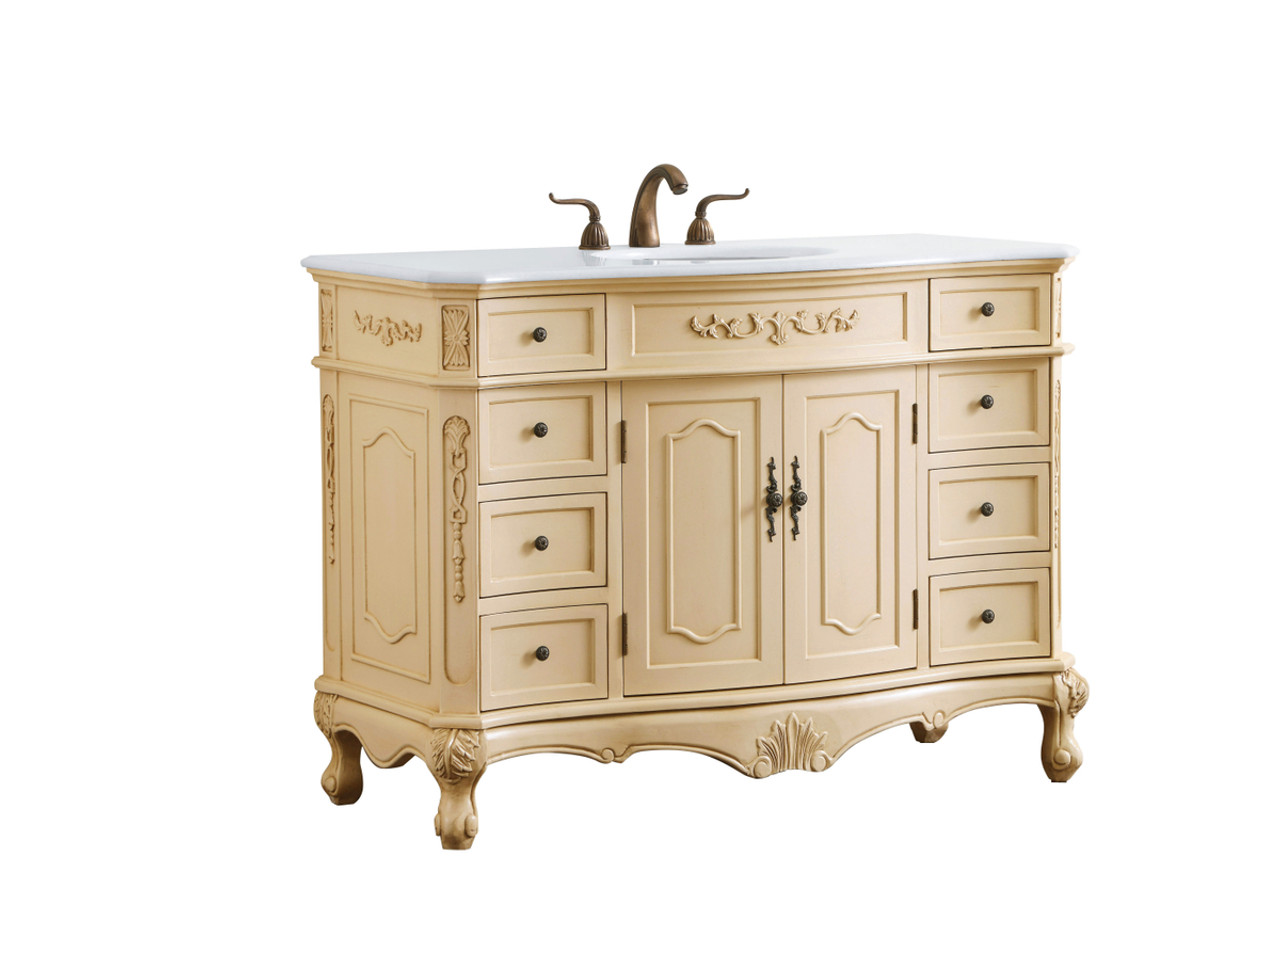 Elegant Kitchen and Bath VF10148LT-VW 48 inch Single Bathroom vanity in light antique beige with ivory white engineered marble